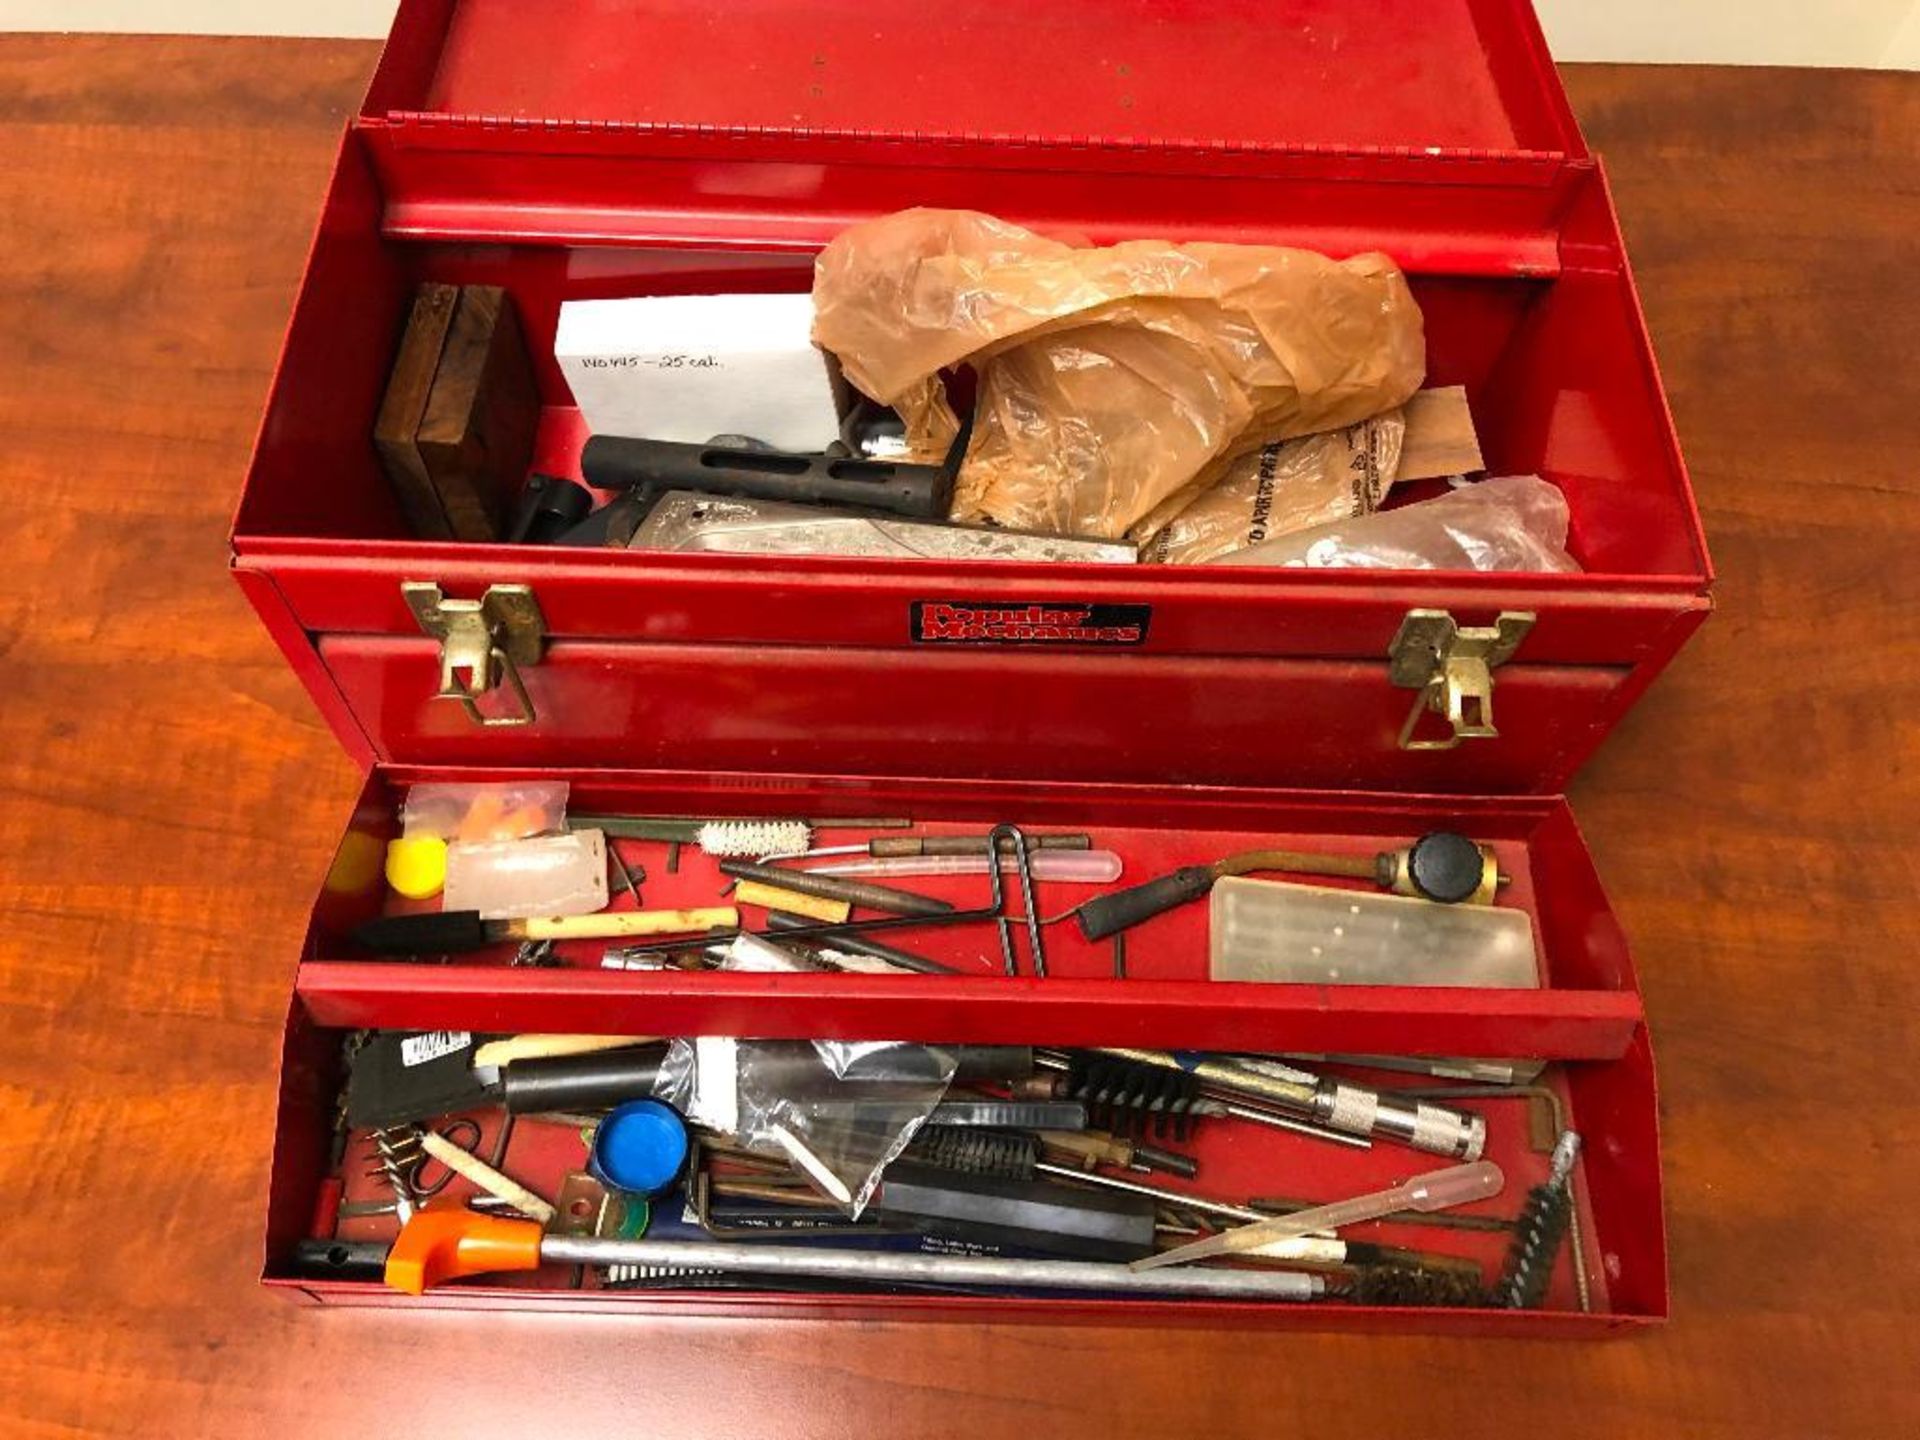 DESCRIPTION: METAL TOOL BOX W/ CONTENTS - FULL OF HAND TOOLS ADDITIONAL INFORMATION: SEE PHOTOS LOCA - Image 2 of 4